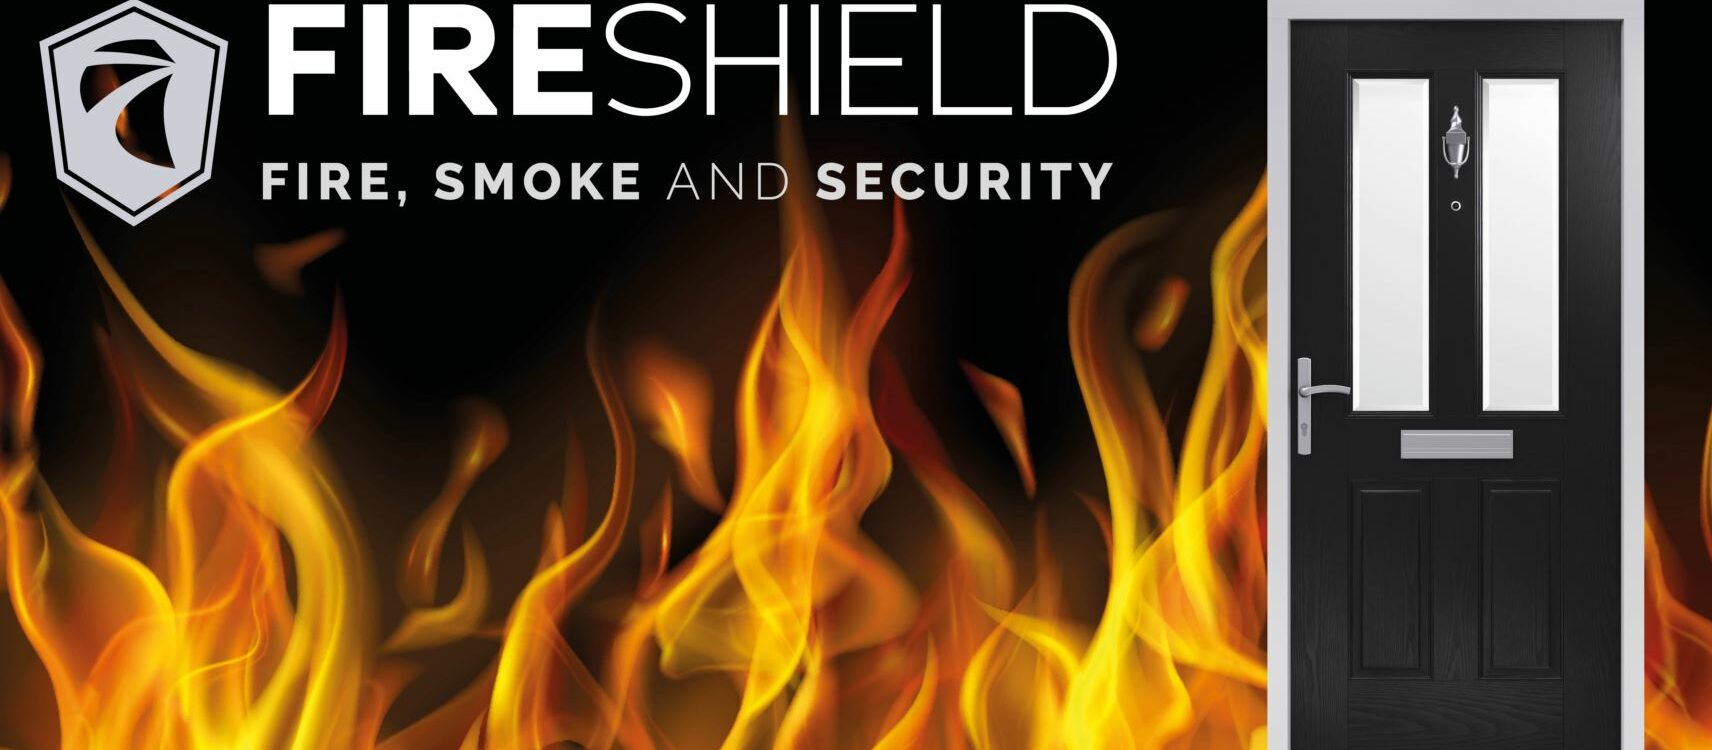 FireShield: A Revolutionary Fire Protection Solution by Bowater Doors